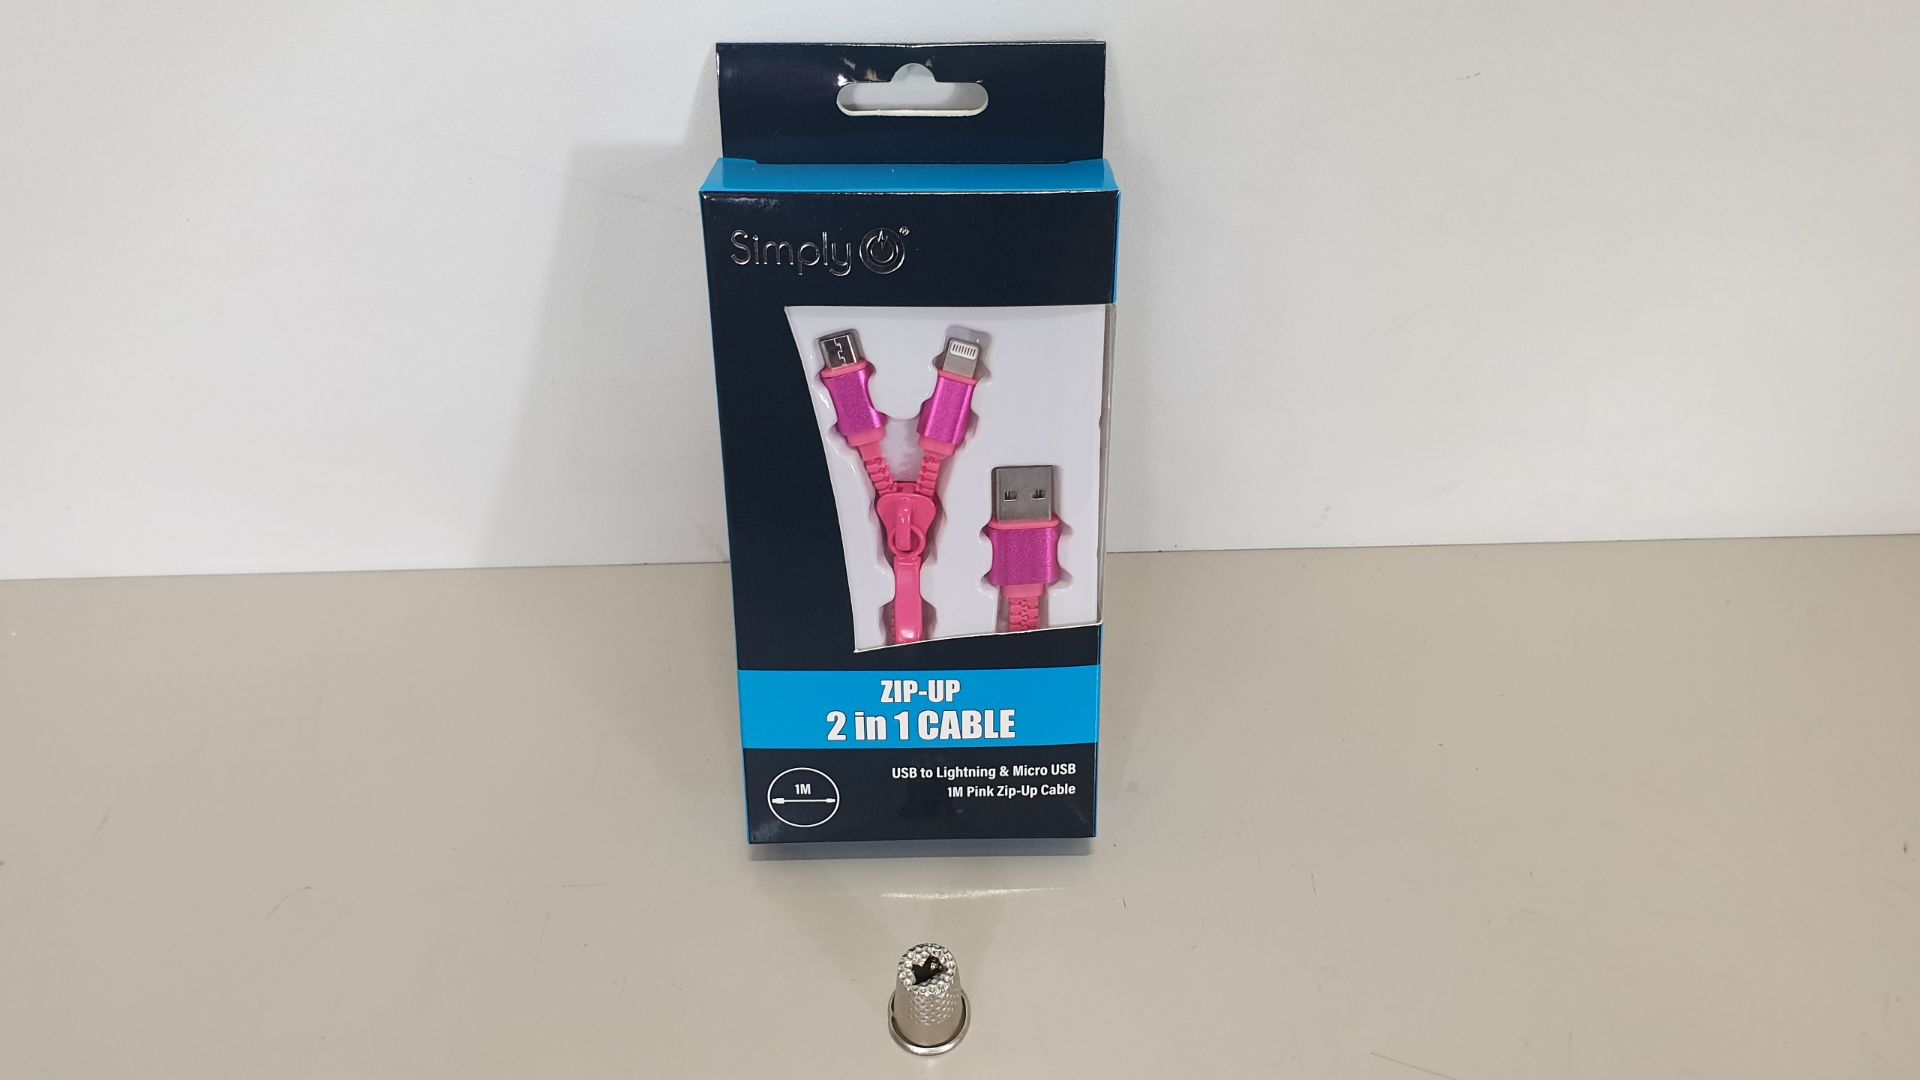 200 X BRAND NEW SIMPLY ZIP-UP 2 IN 1 CABLE - USB TO LIGHTNING & MICRO USB 1M PINK ZIP UP CABLE IN